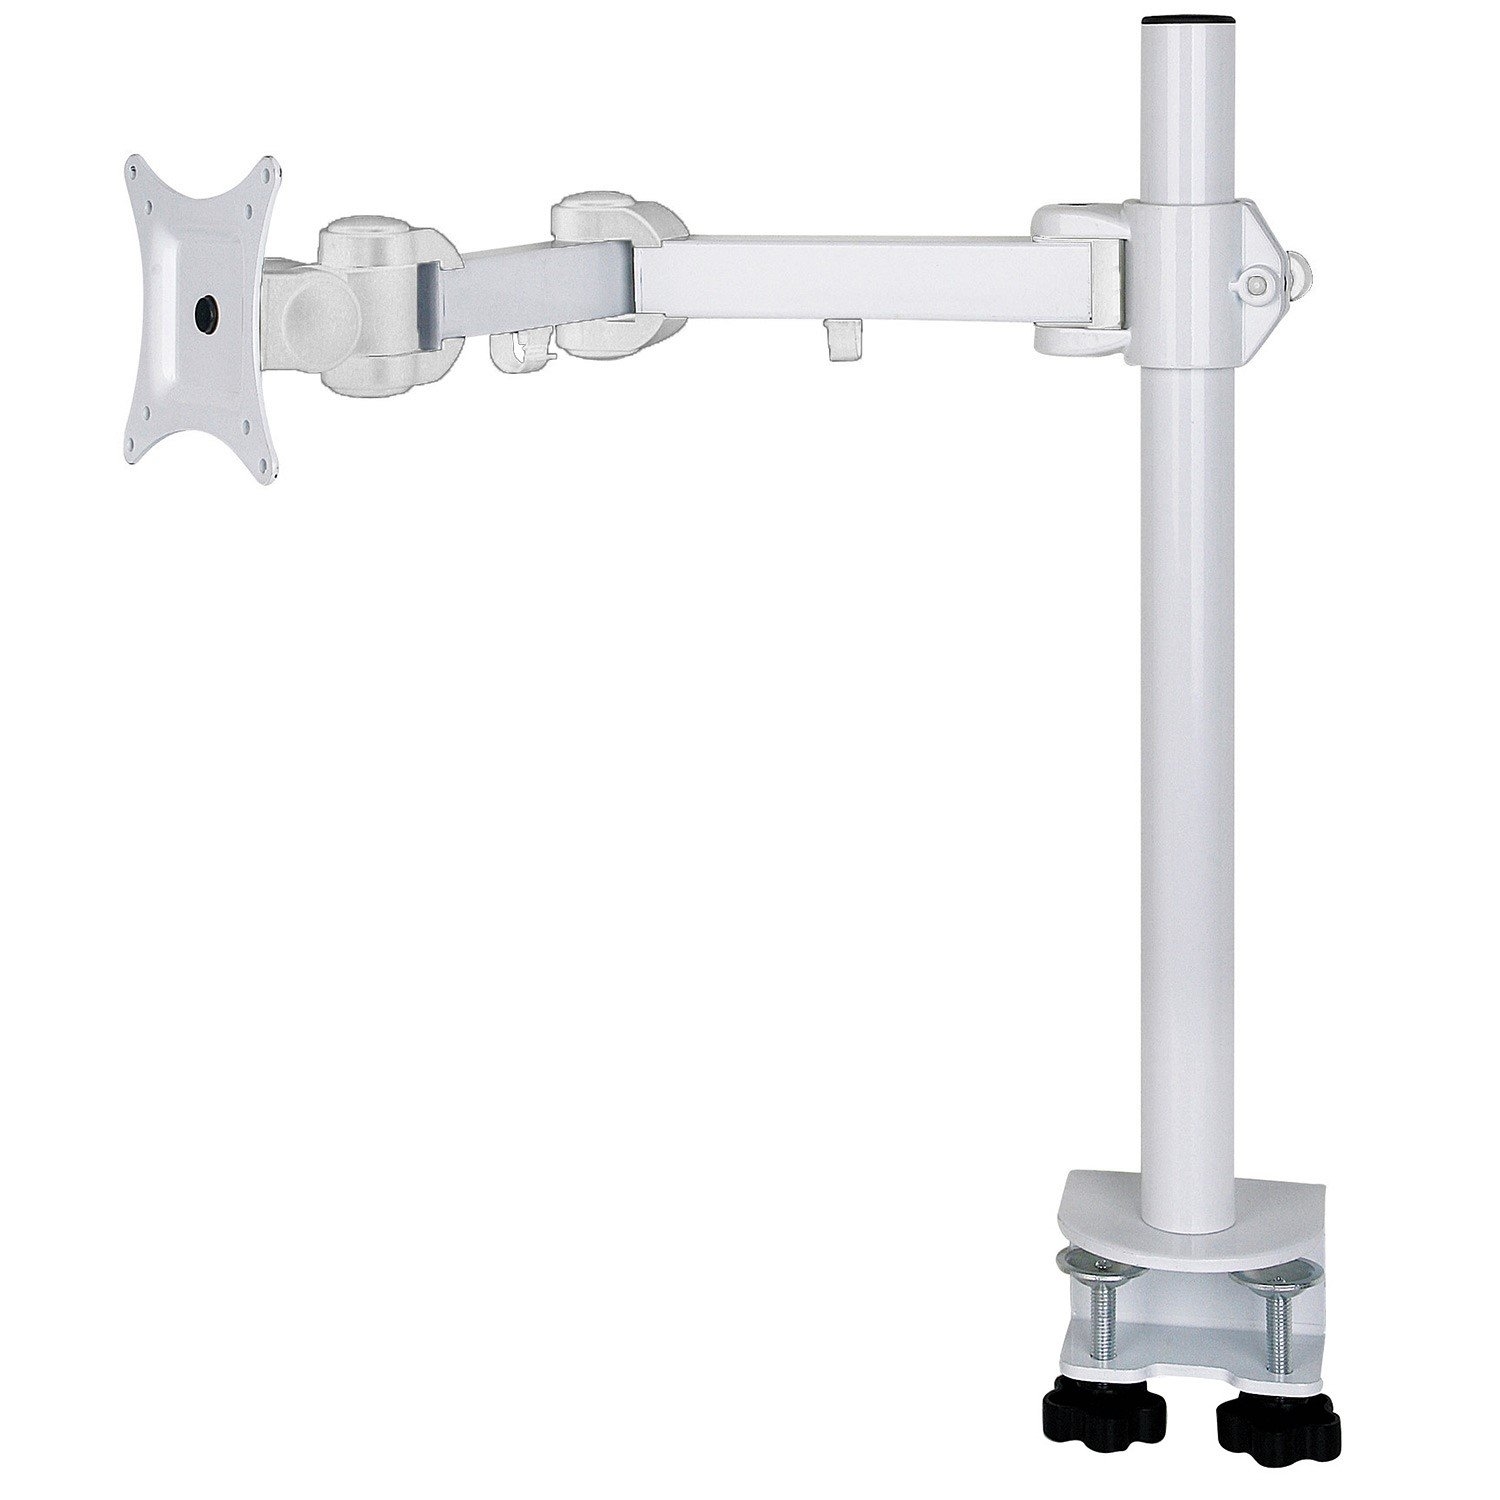 Pole Mounted Monitor Arm For Single Screen – Up Standesk